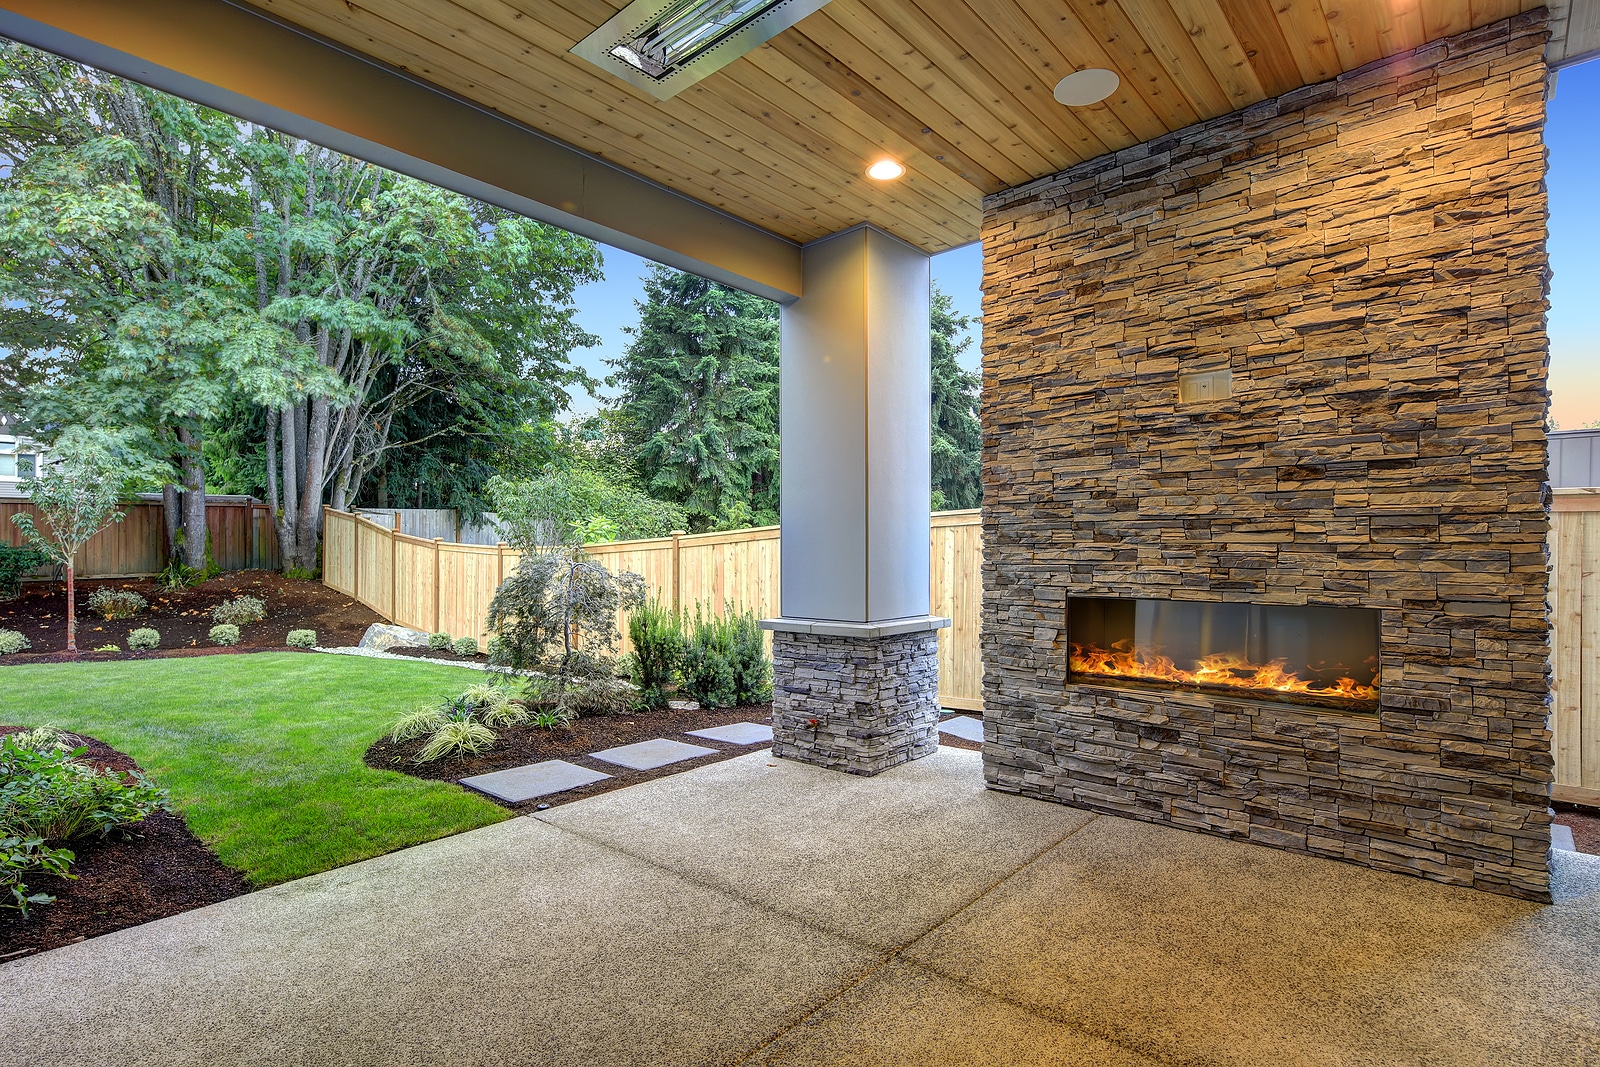 3 Outdoor Living Ideas for Your Next Home Improvement Project